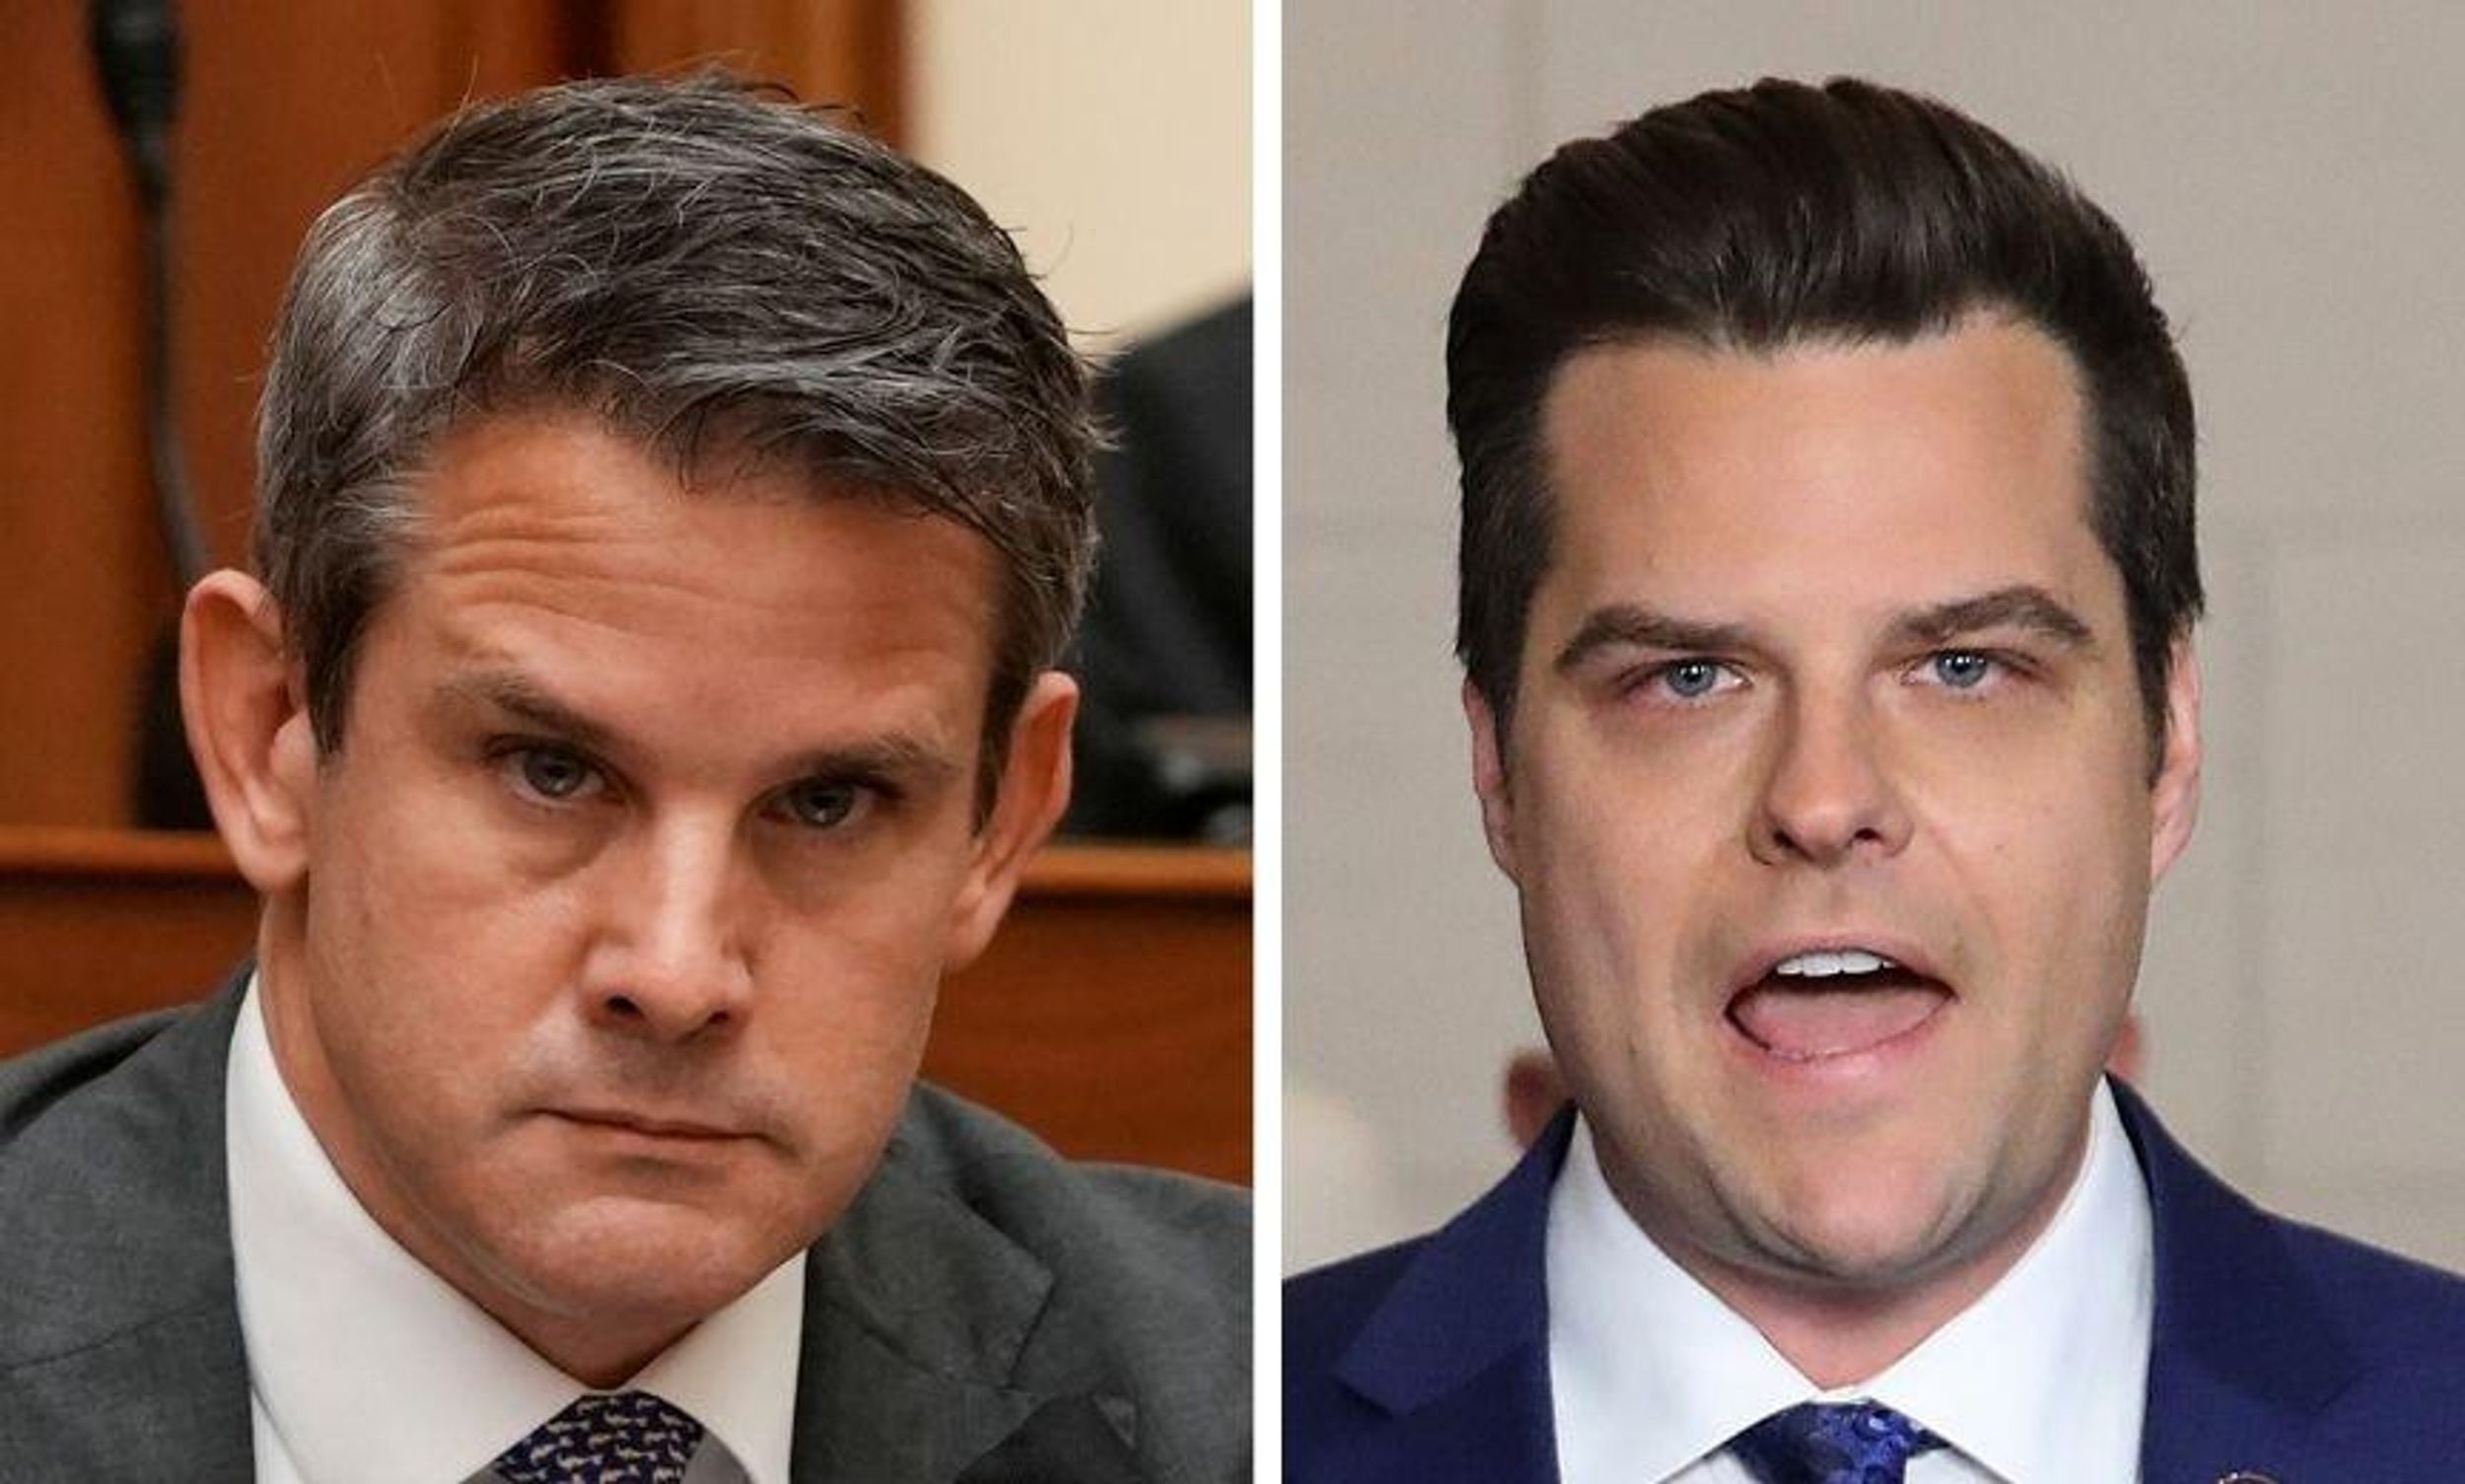 GOP Rep. Is First to Call for Matt Gaetz to Resign After Damning News of Venmo Payment